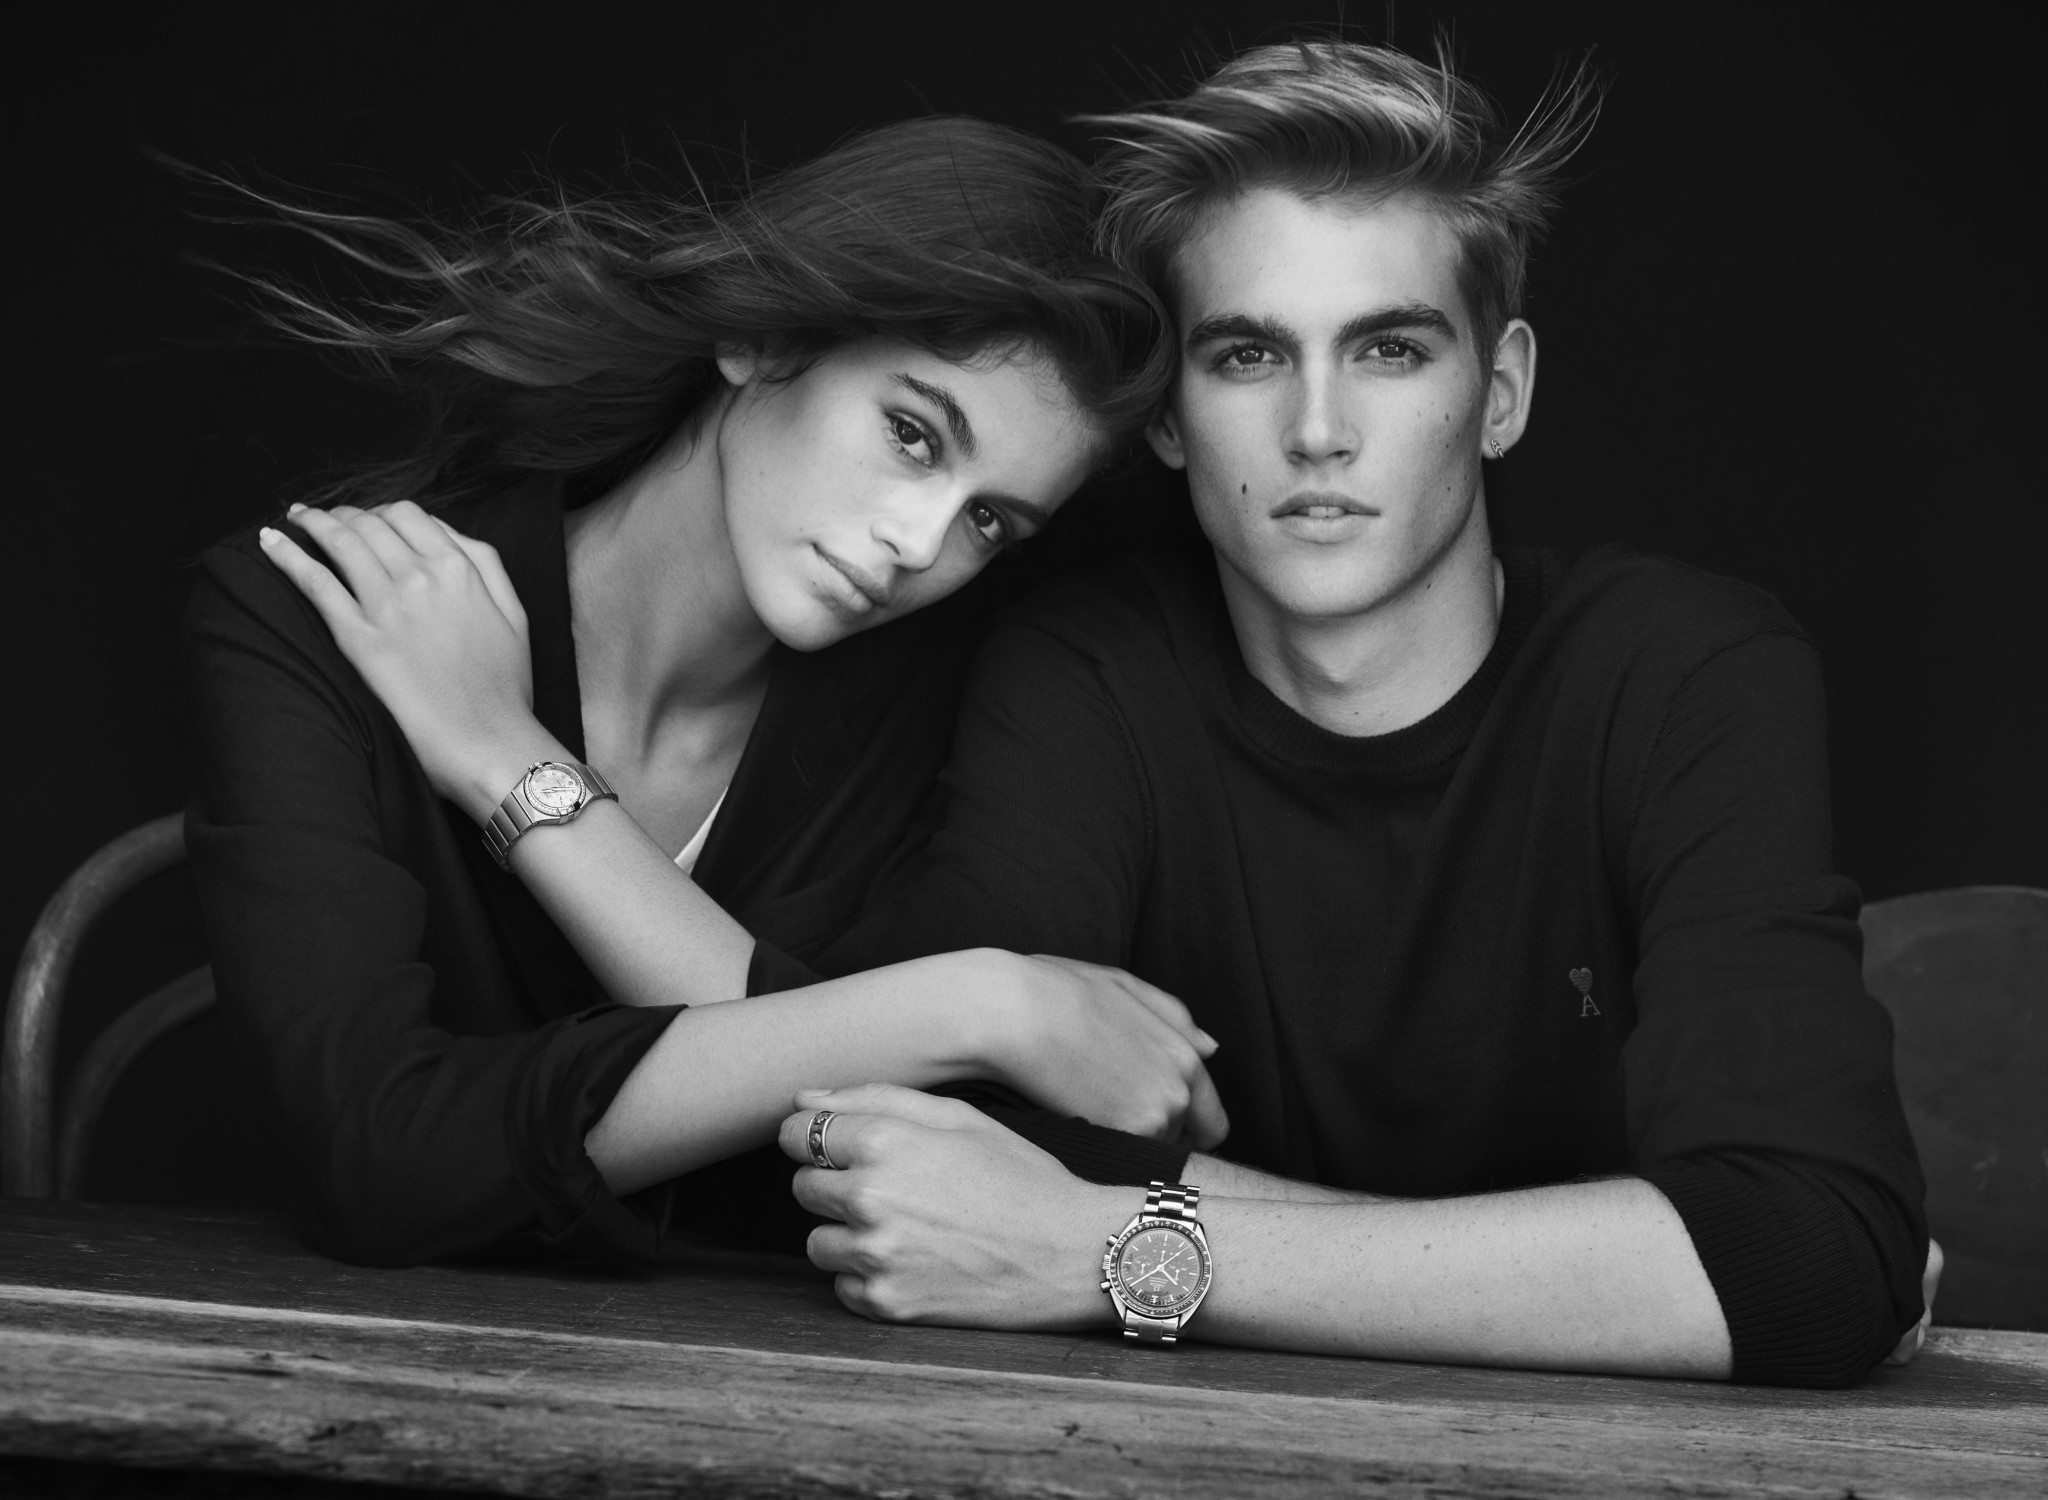 Kaia and presley gerber pose for omega in a portrait by peter lindbergh.